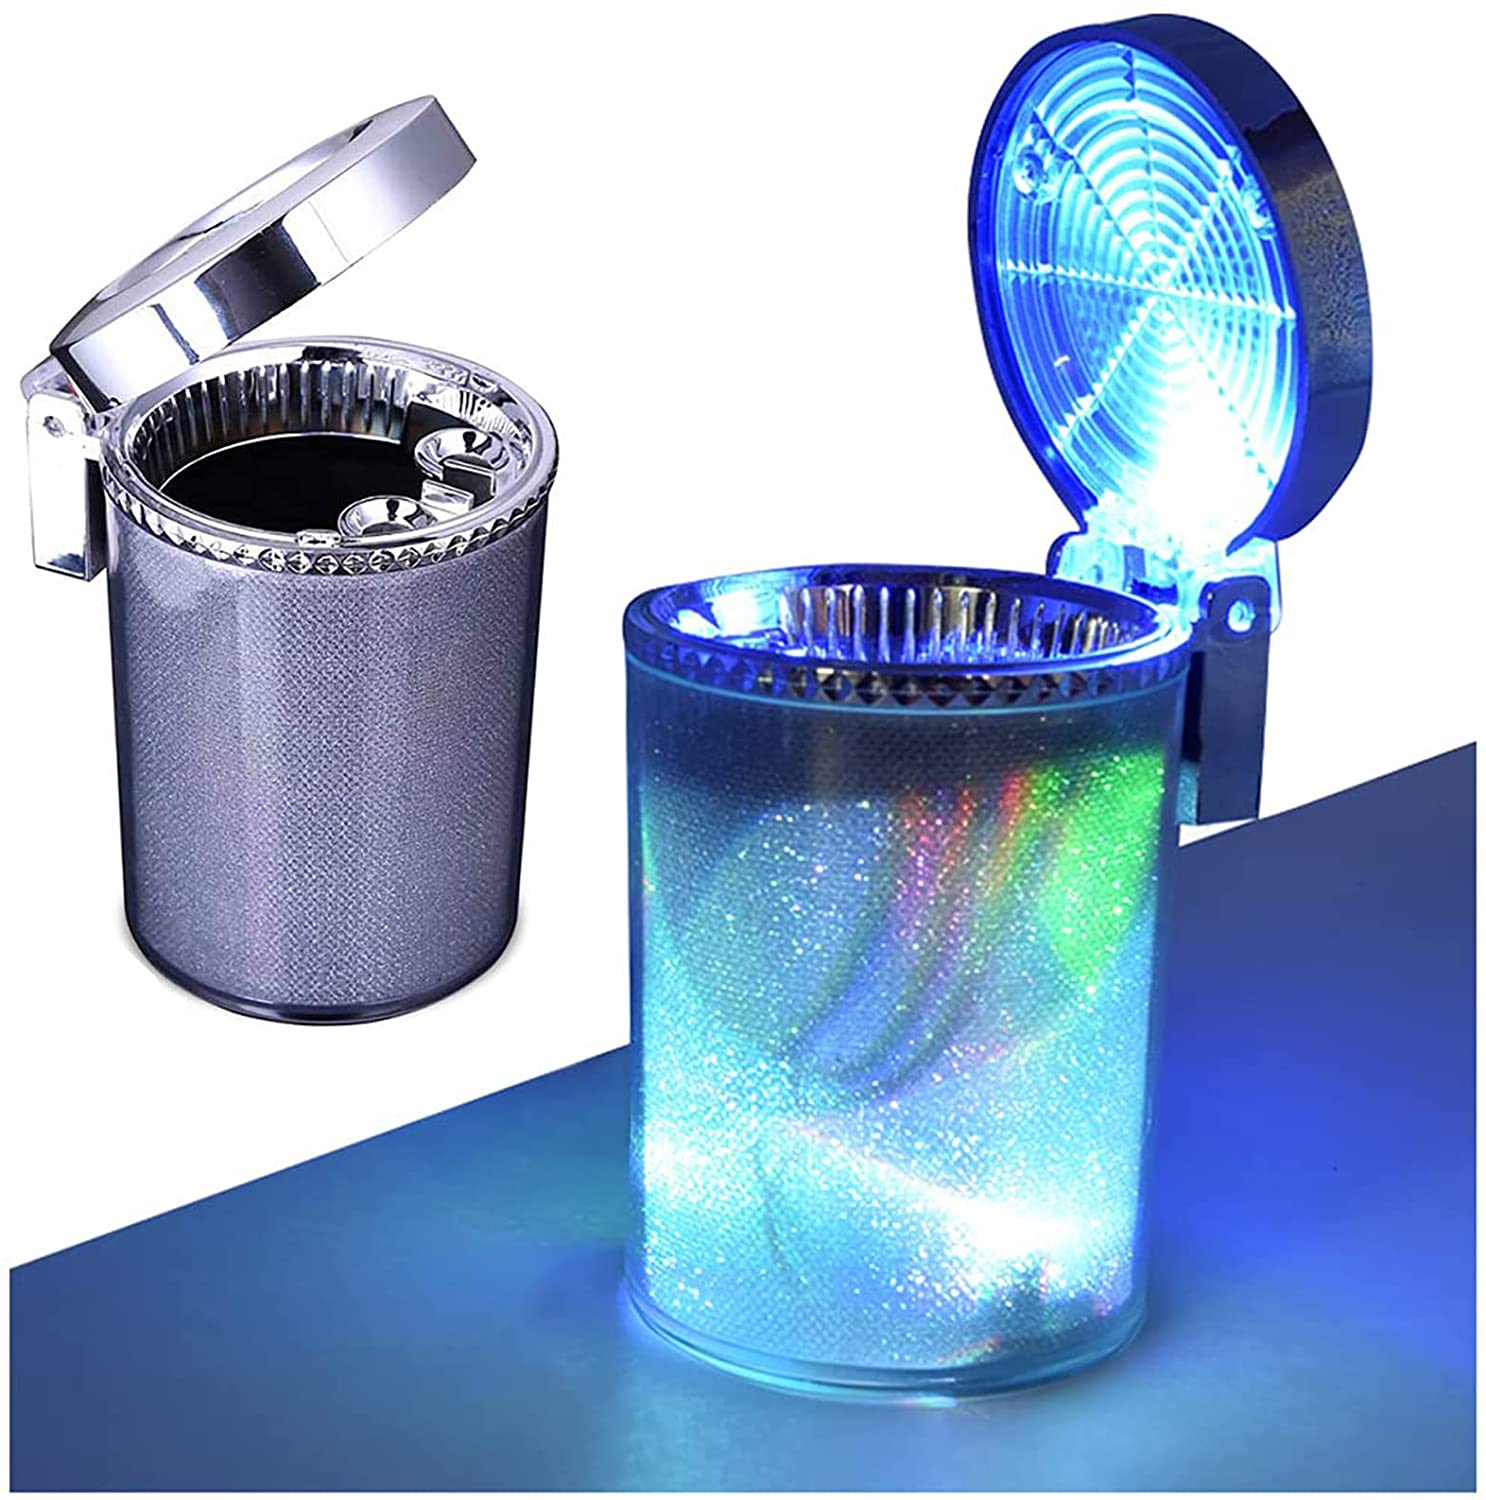 CarOxygen - Ashtray Portable Ashtray with Colorful LED Light Smokeless Ashtray with Lid Smell Proof, Suitable for Car, Outdoor Travel, Home Use, Office